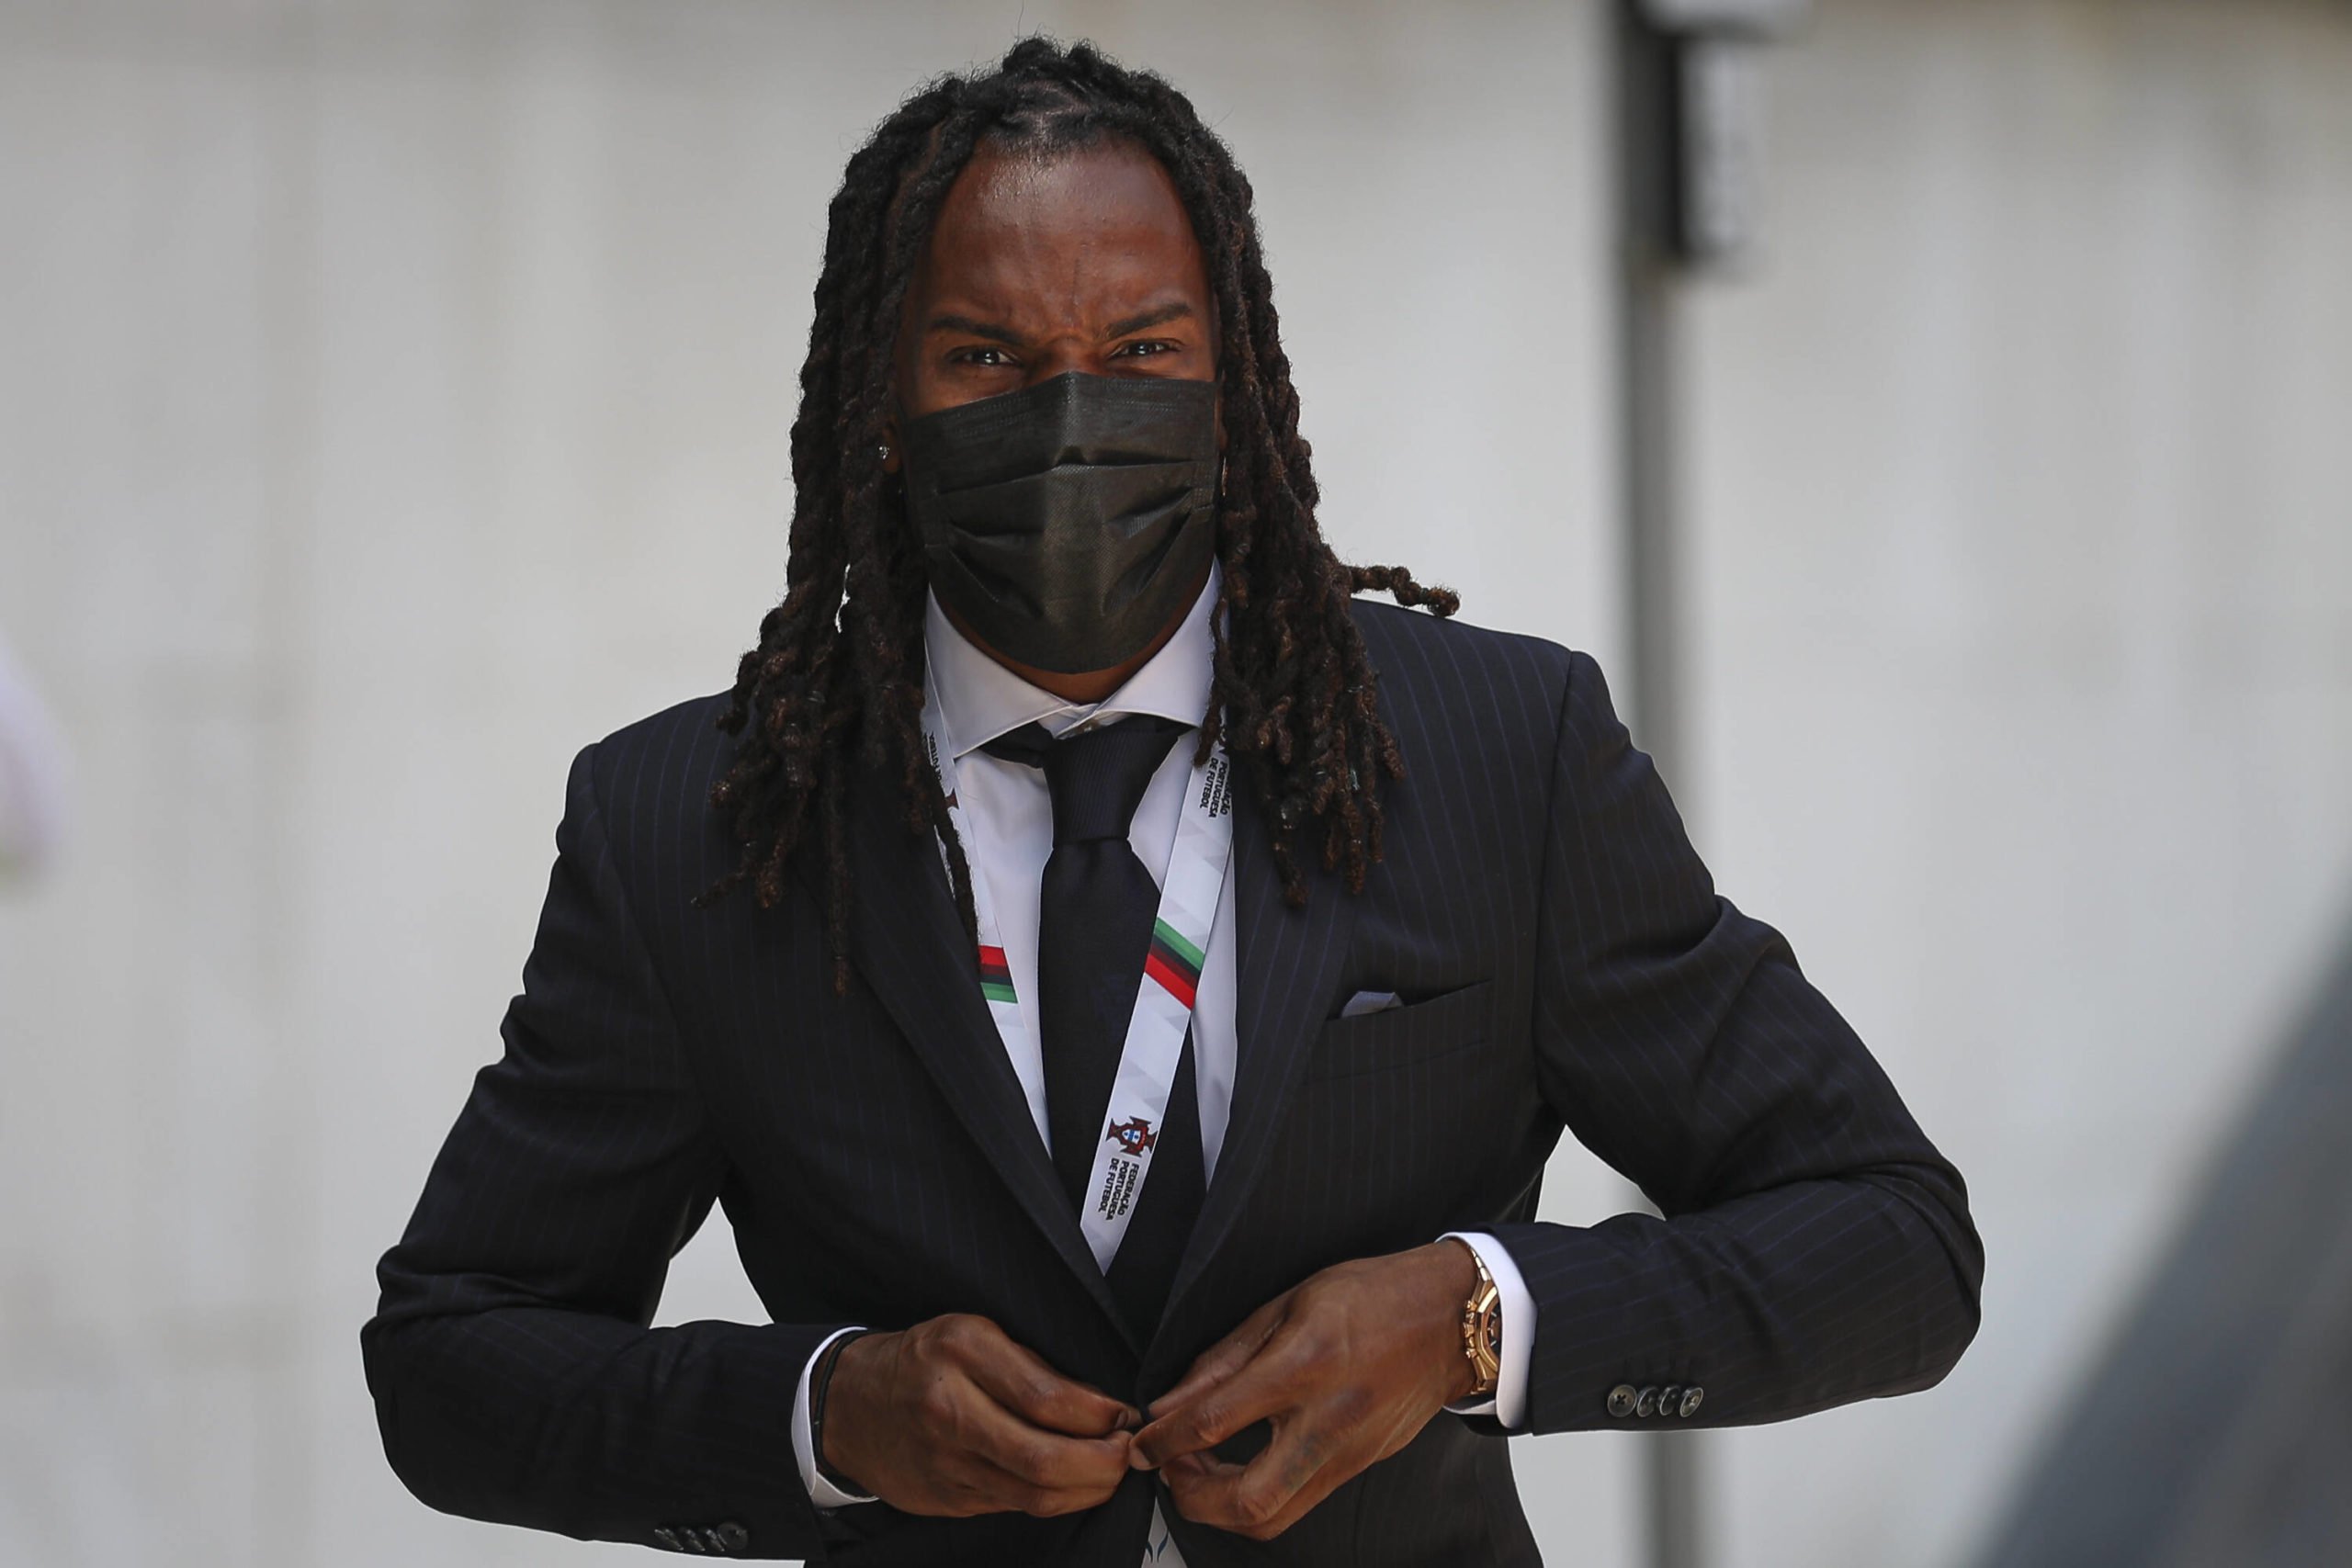 Renato Sanches could join Liverpool this summer (Renato Sanches is seen in the picture)